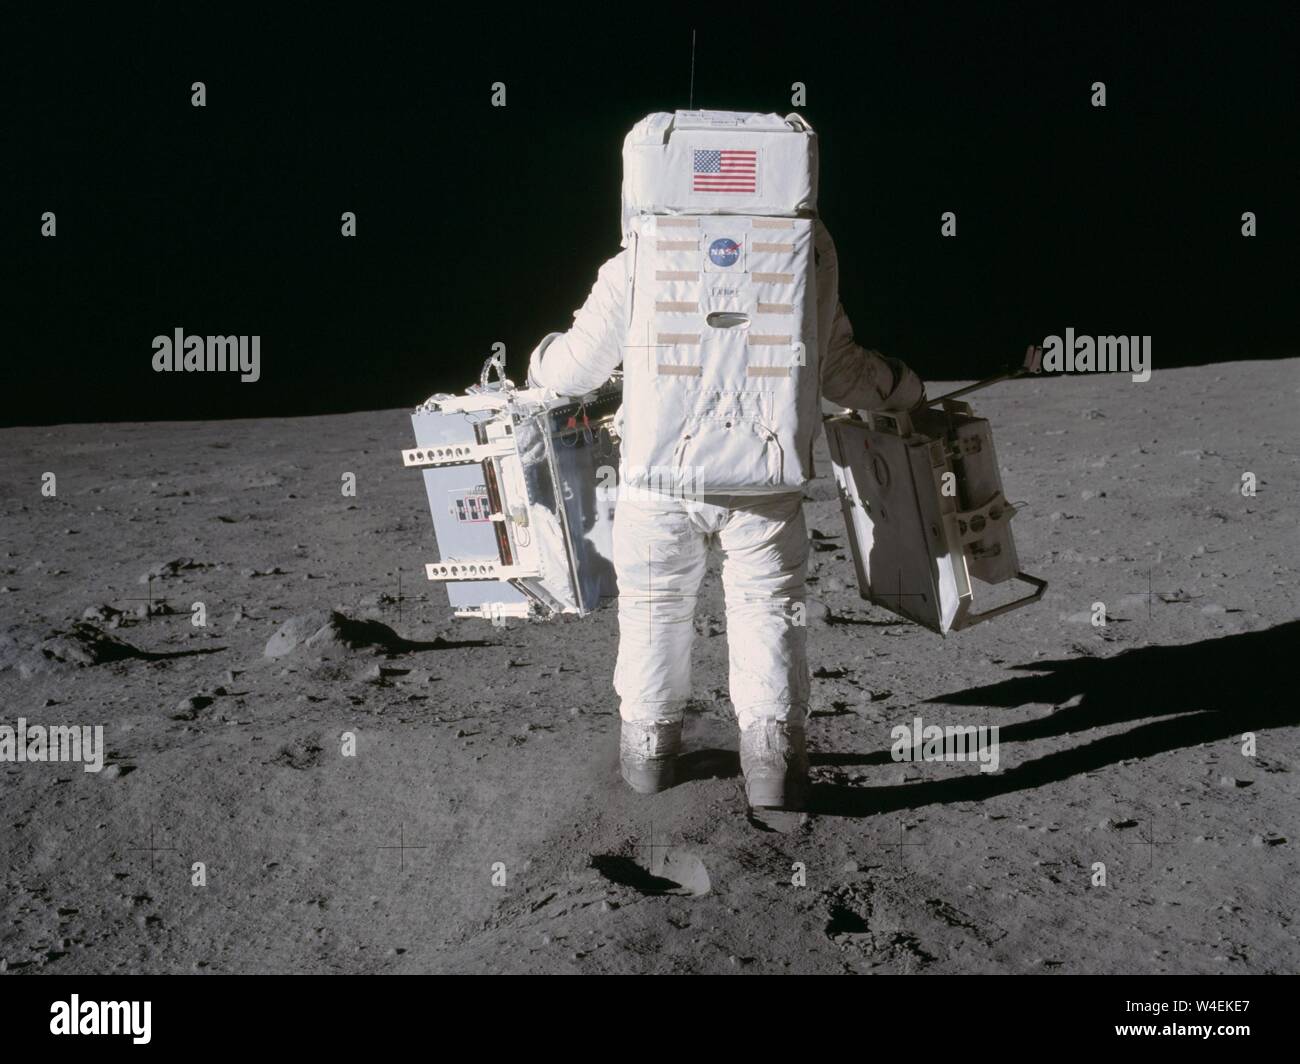 Astronaut and lunar module pilot Buzz Aldrin moves toward a position to deploy two components of the Early Apollo Scientific Experiments Package (EASEP) on the surface of the moon during the Apollo 11 extravehicular activity. The Passive Seismic Experiments Package (PSEP) is in his left hand; and in his right hand is the Laser Ranging Retro-Reflector (LR3). Mission commander Neil Armstrong took this photograph with a 70mm lunar surface camera. Image Credit: NASA/Capital Pictures  Credit NASA/Capital / MediaPunch  ** USA ONLY** Stock Photo